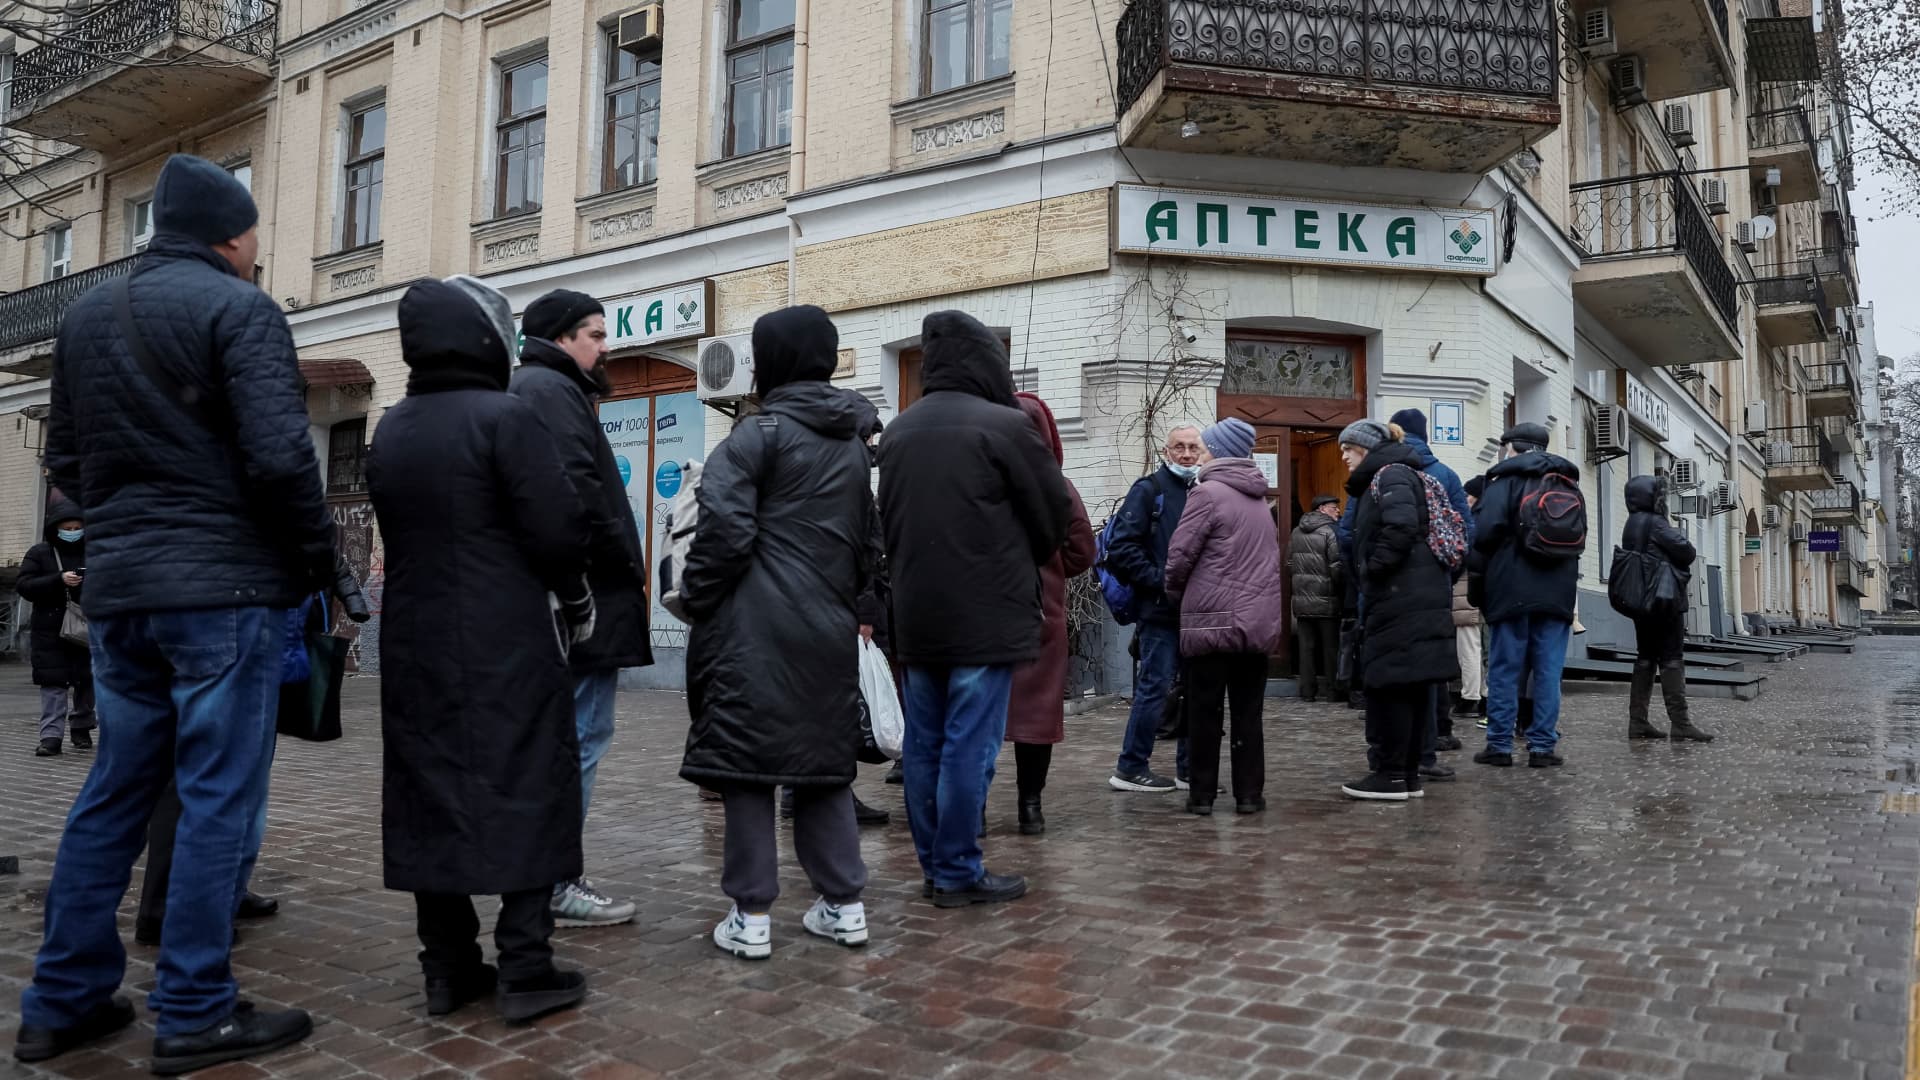 People line up in front of a pharmacy, as Russia's invasion of Ukraine continues, in central Kyiv, Ukraine March 2, 2022.